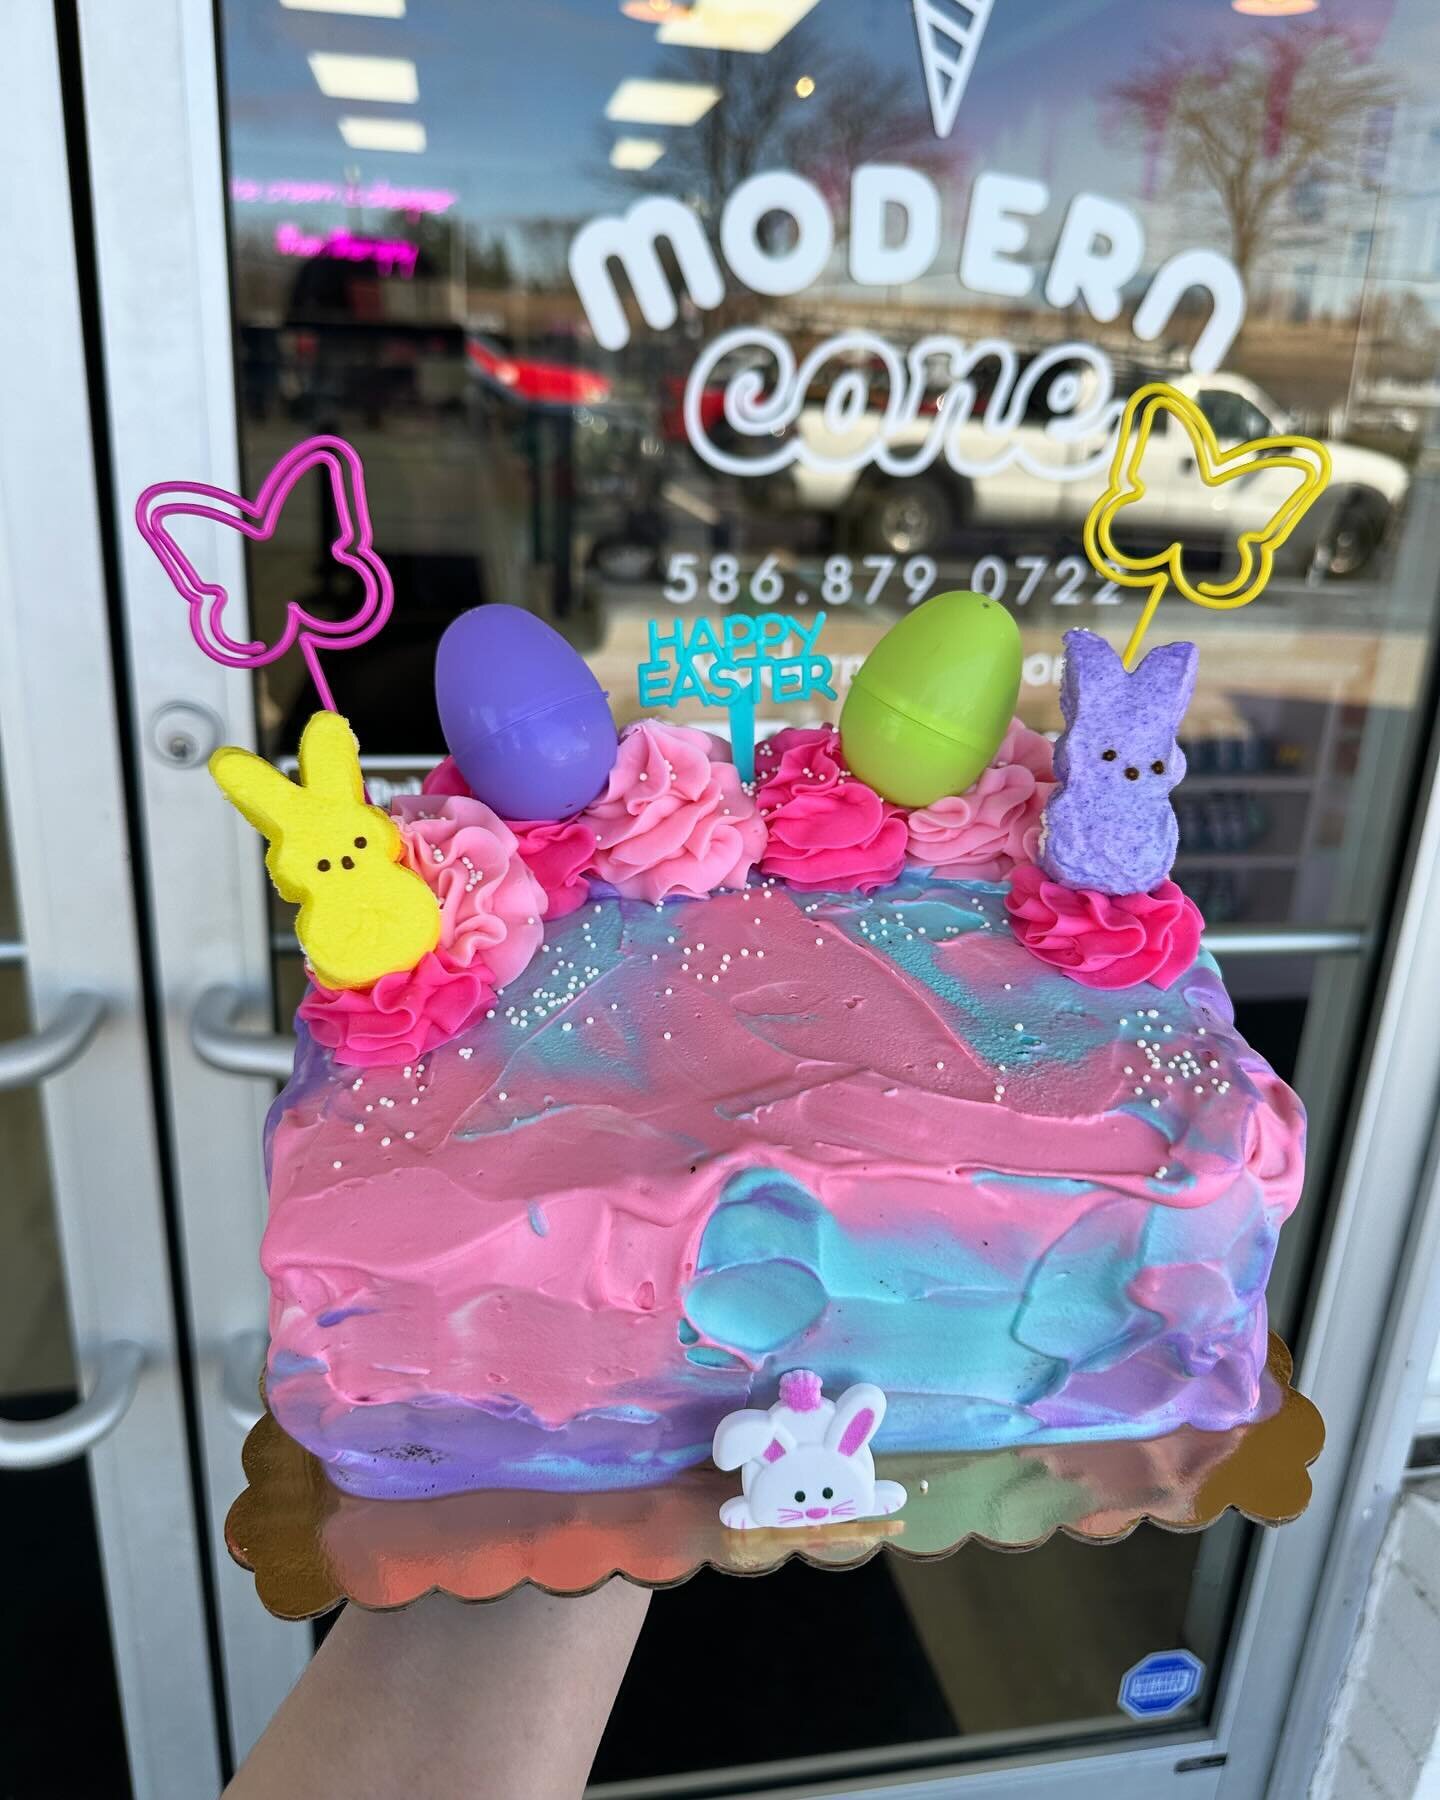 Easter ice cream cake will be stocked in our freezer all next week! No need to custom order unless you&rsquo;re looking for something specific. We will be closed Easter Day! 🎂🐣🐇
📍@moderncone